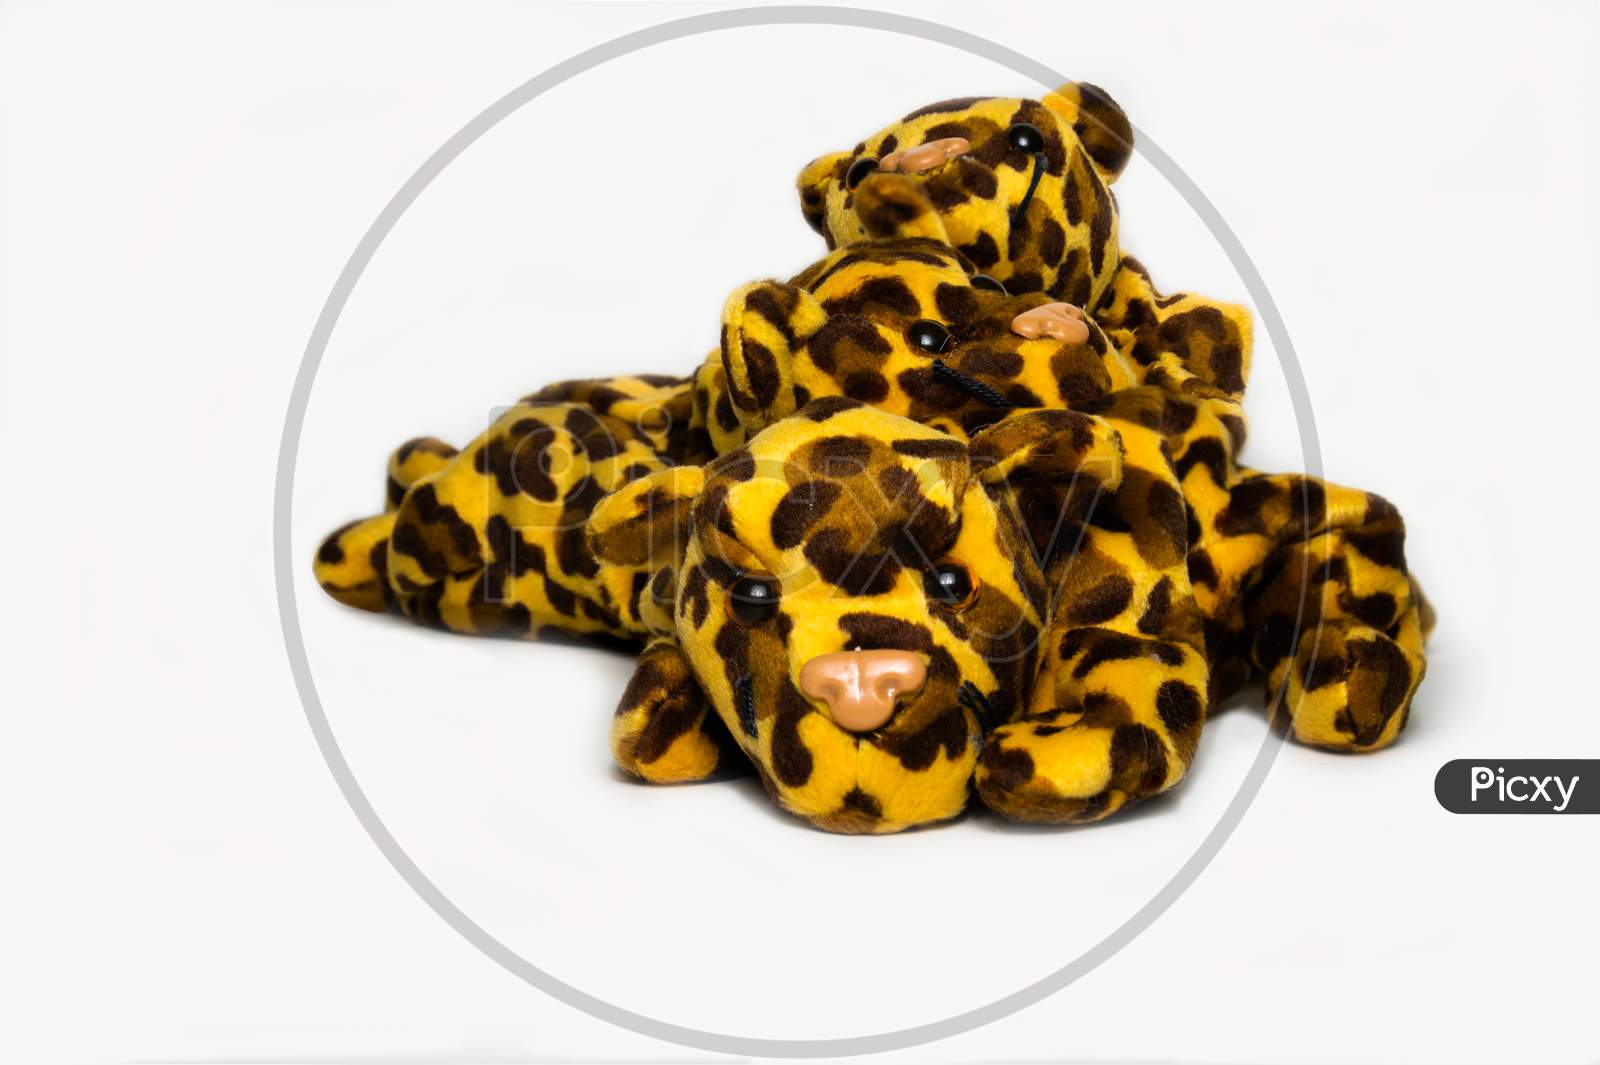 Three Playful Stuffed Leopard Soft Toys Isolated On A Plain White Background